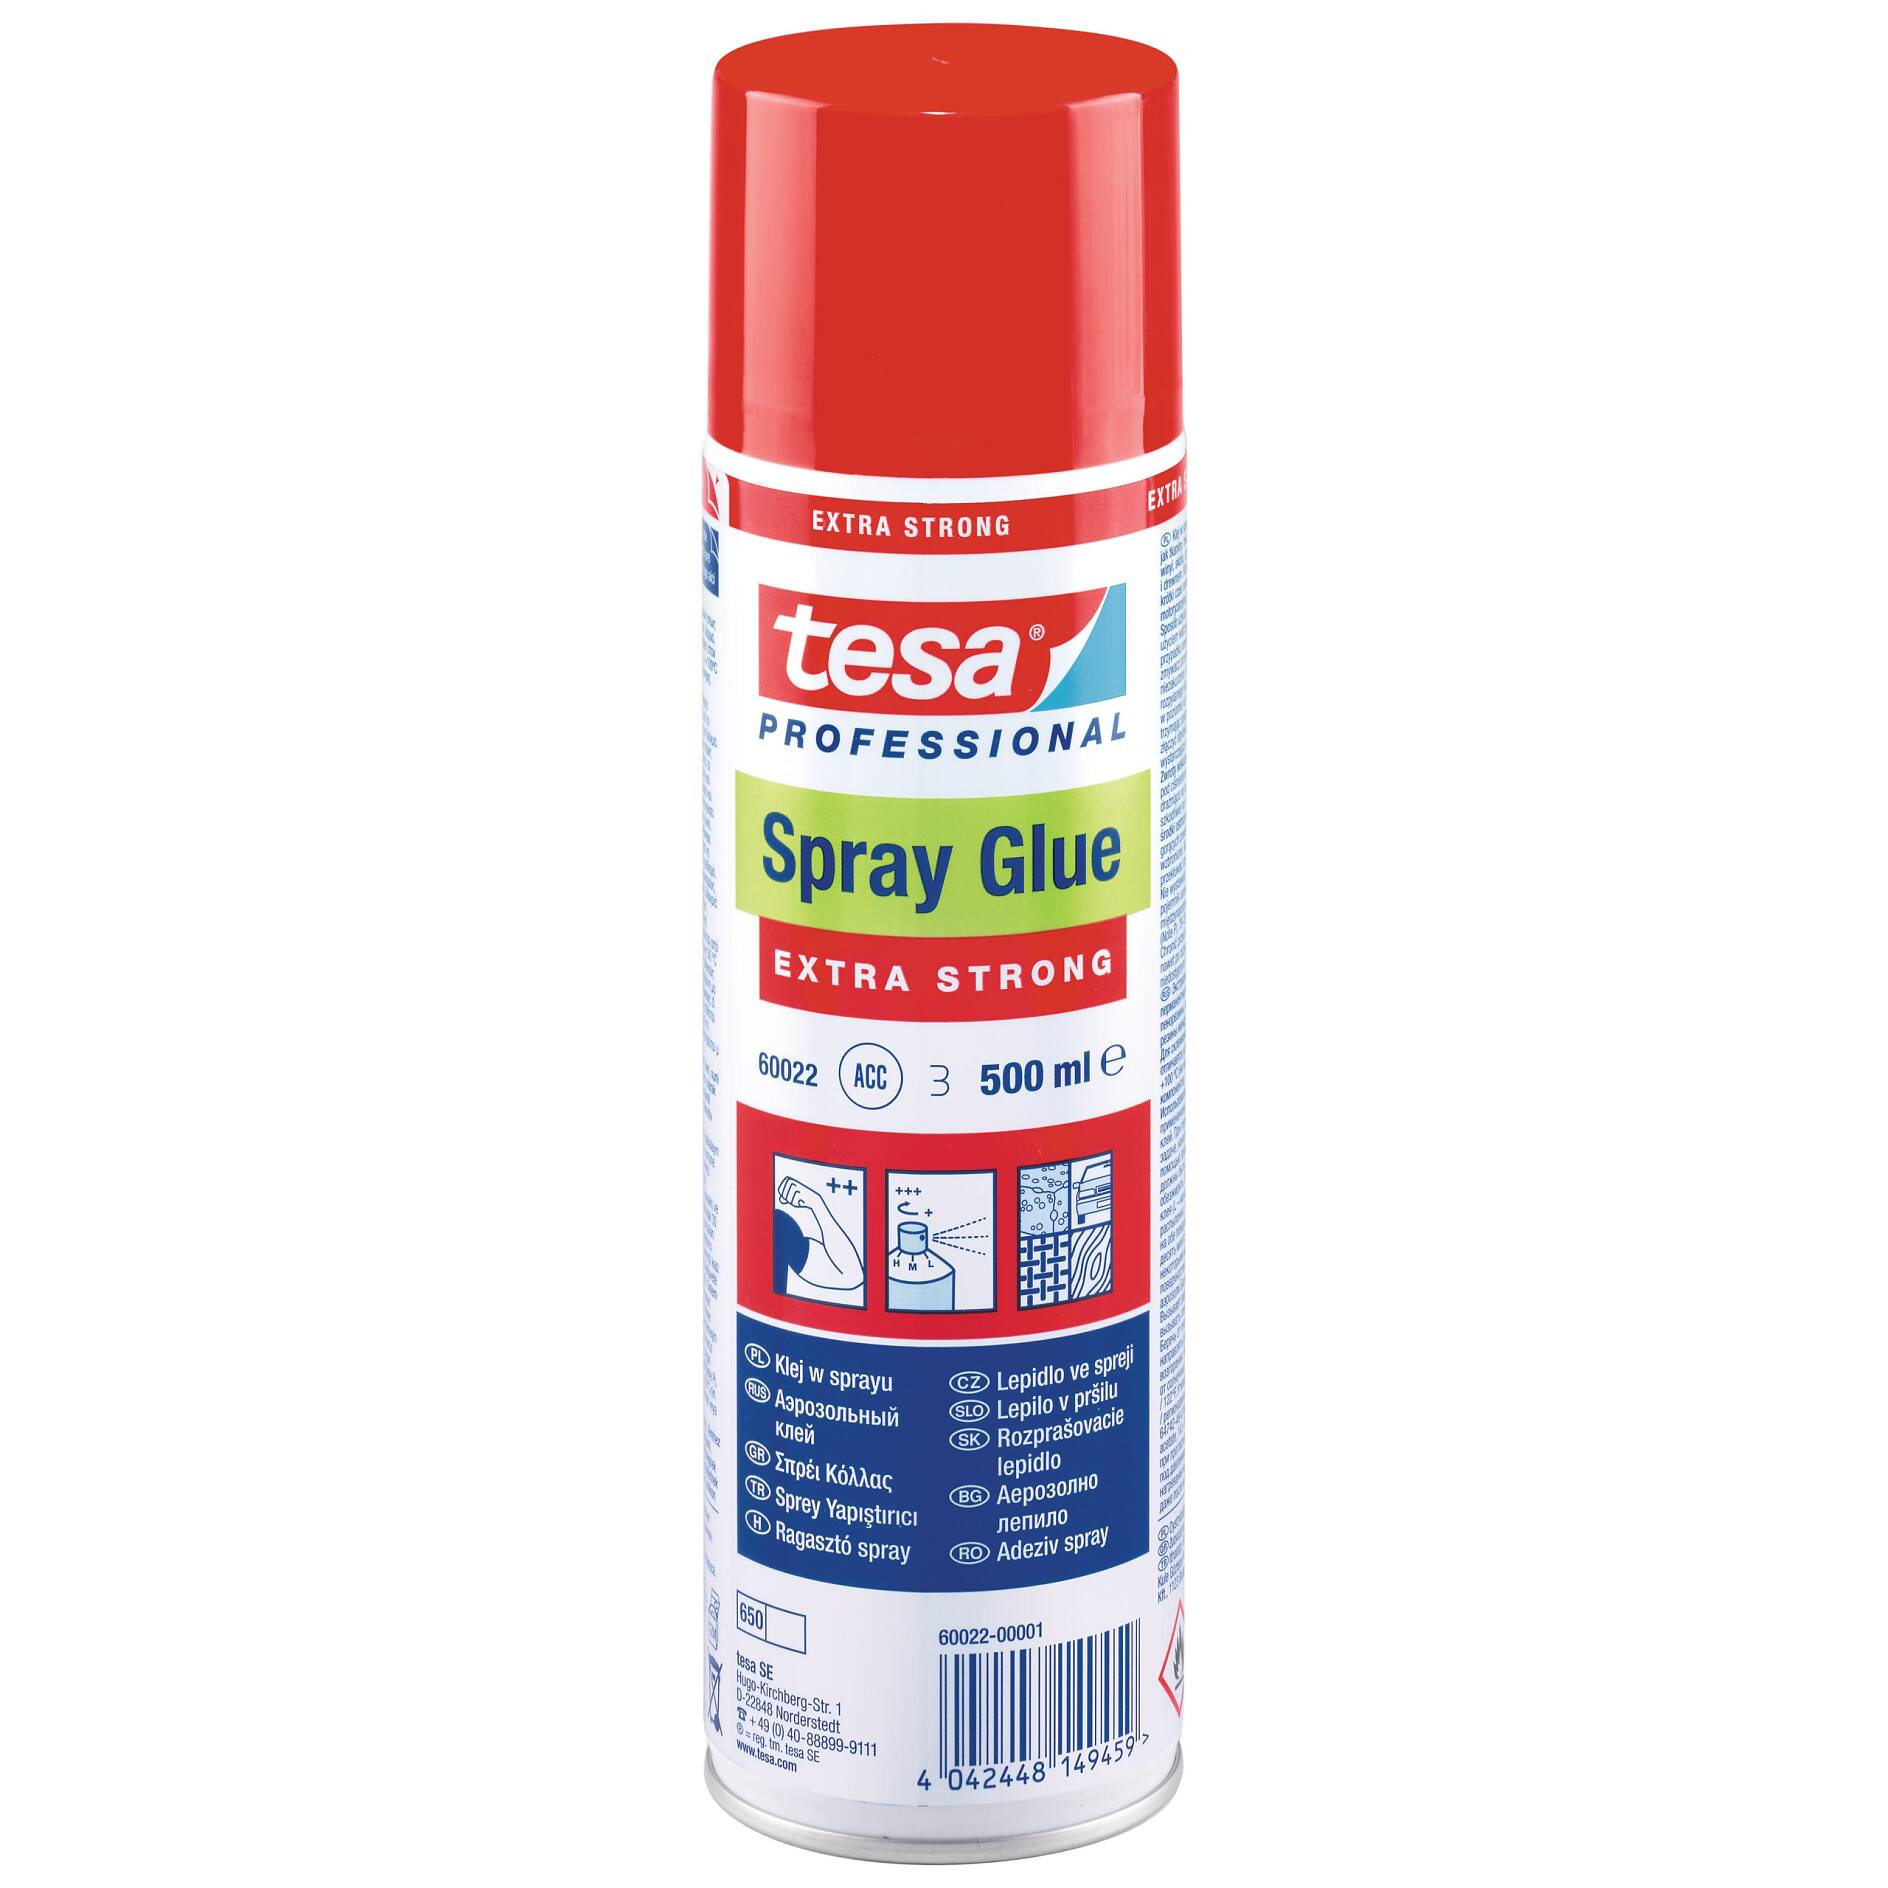 INSTAbond S-1500 Clear A-A-3097 Type 2 Class 3 Cyanoacrylate Adhesive - 1  oz Bottle at